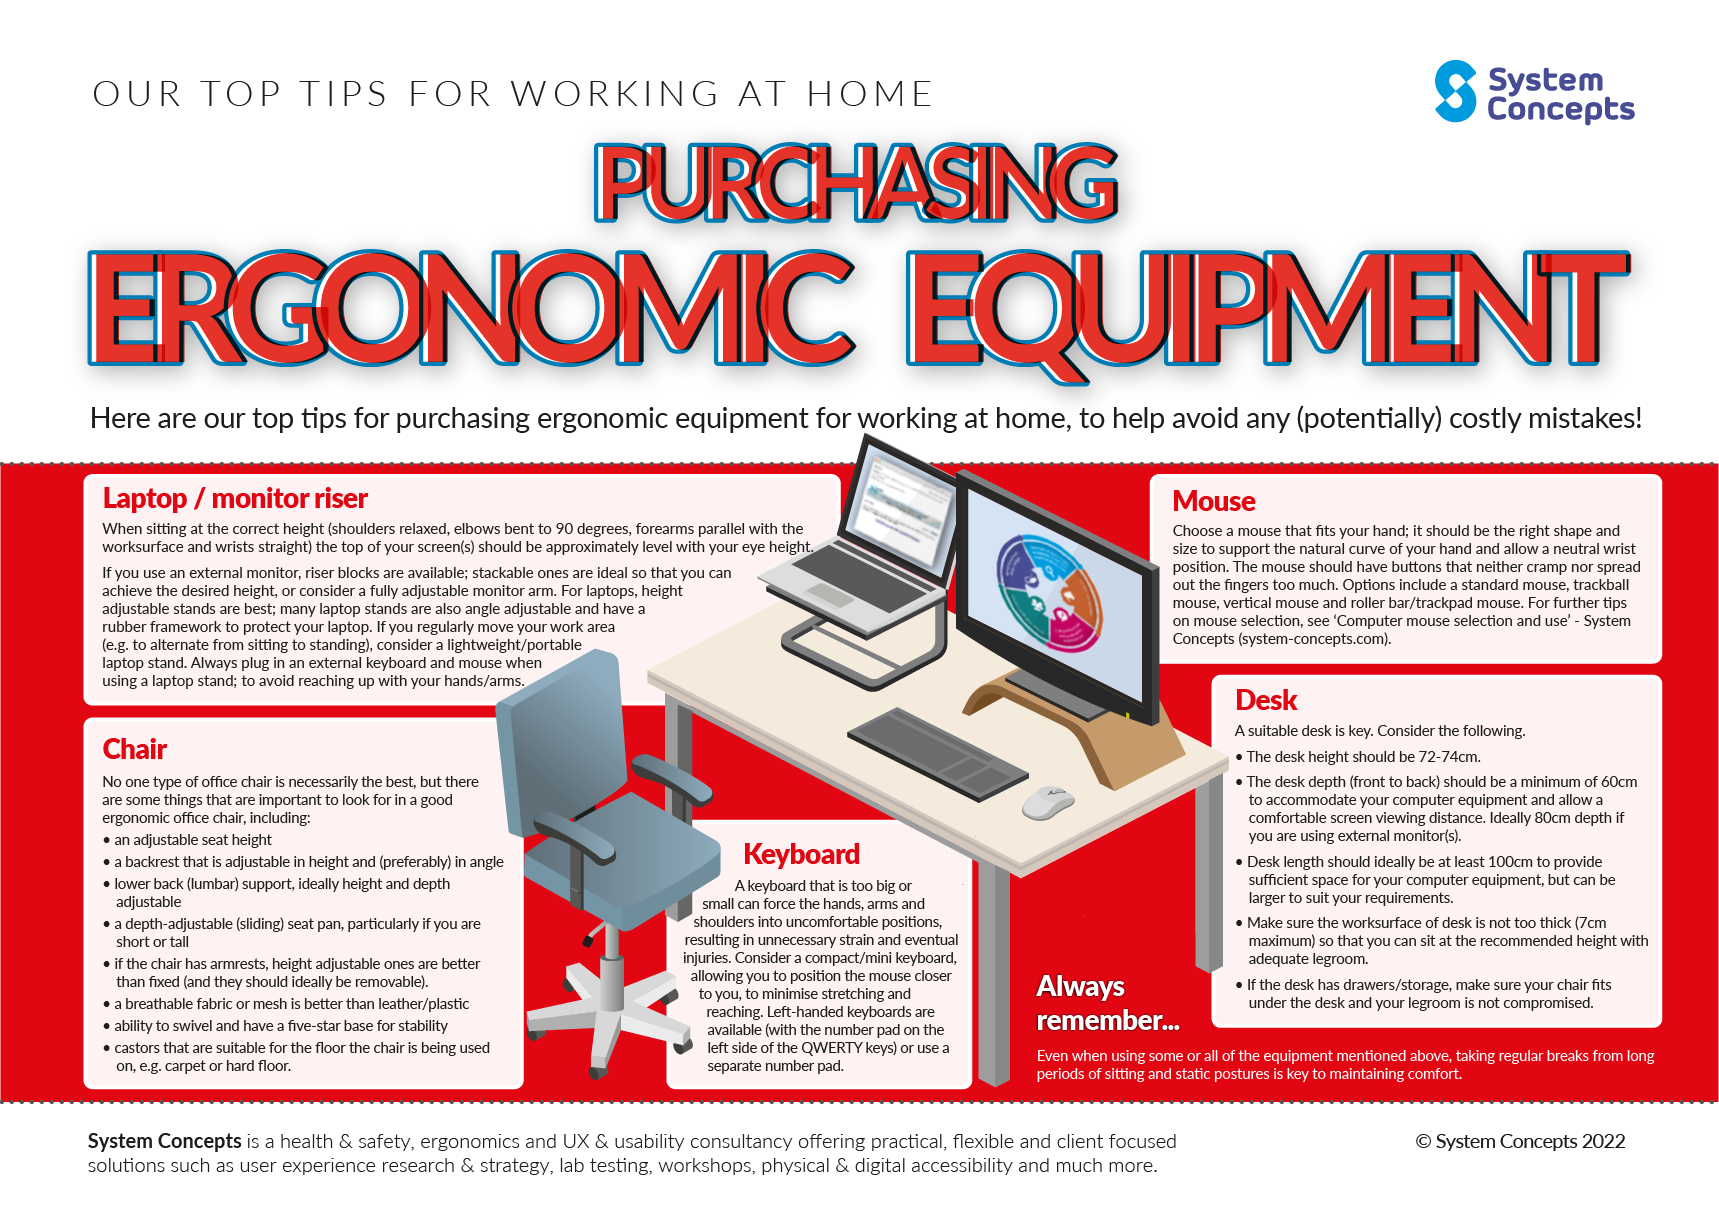 (alt="Working from home infographic, our top tips for purchasing ergonomic equipment")